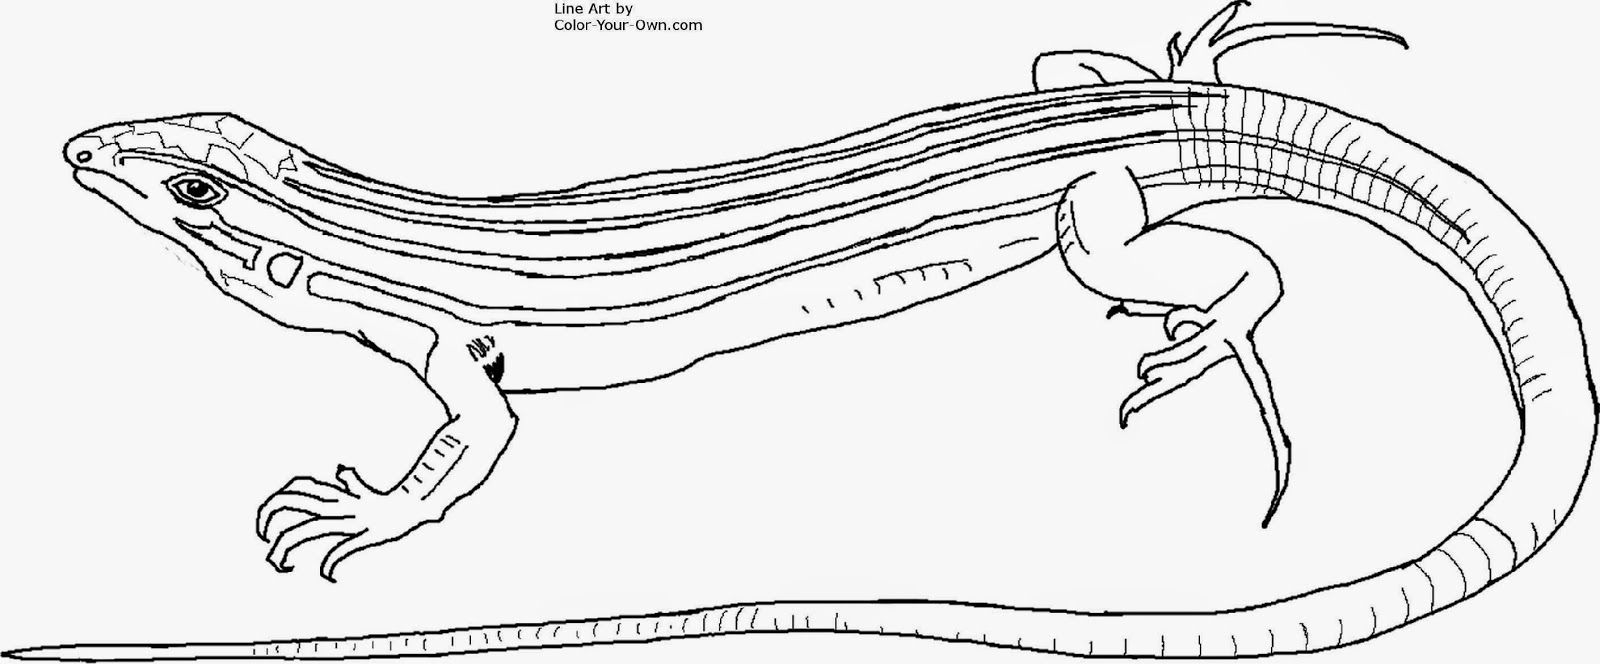 Lizard Coloring Pages | Free Coloring Pages